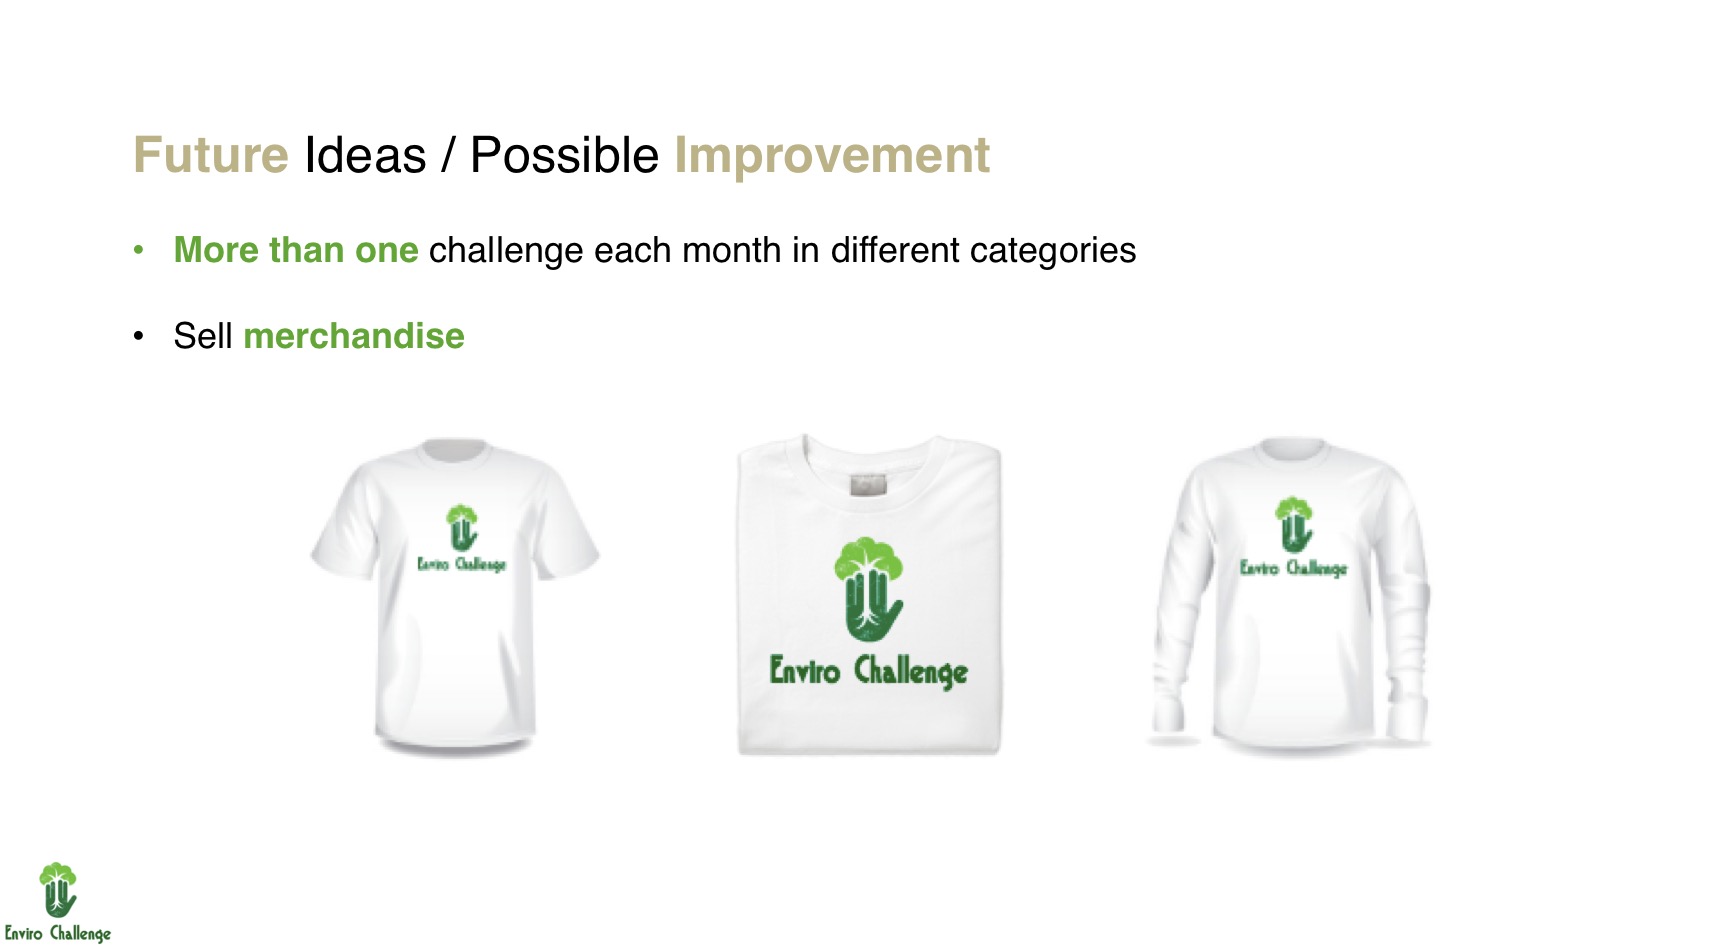 A slide from the Enviro Challenge pitch featuring merchandise ideas